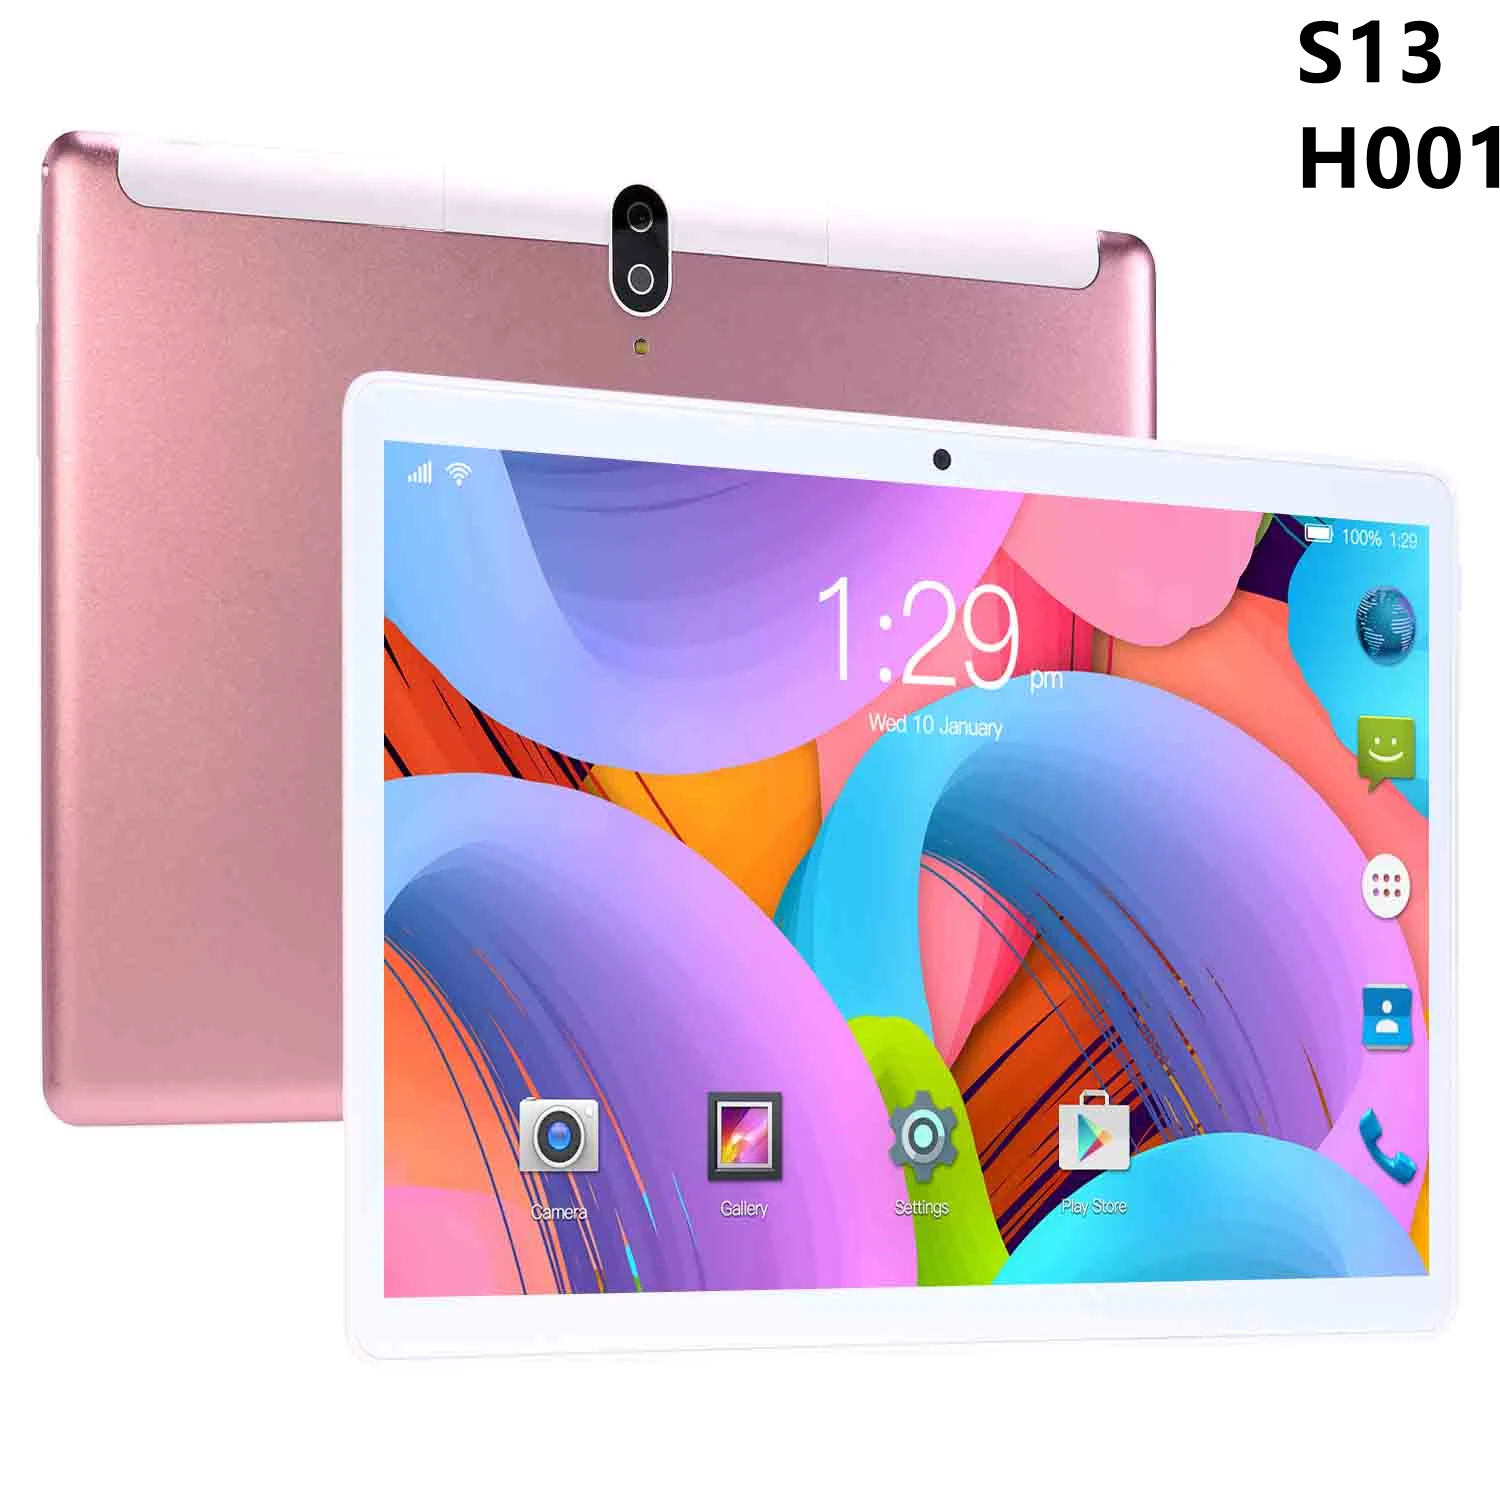 Firmware Dual SIM S13 8800mAh Tablet PC 5G Hоутбук Android 10 12GB 512GB 10.1 Inch 10 Core Google Laptop Netbook GPS LTE Pad Pro best writing tablet Tablets